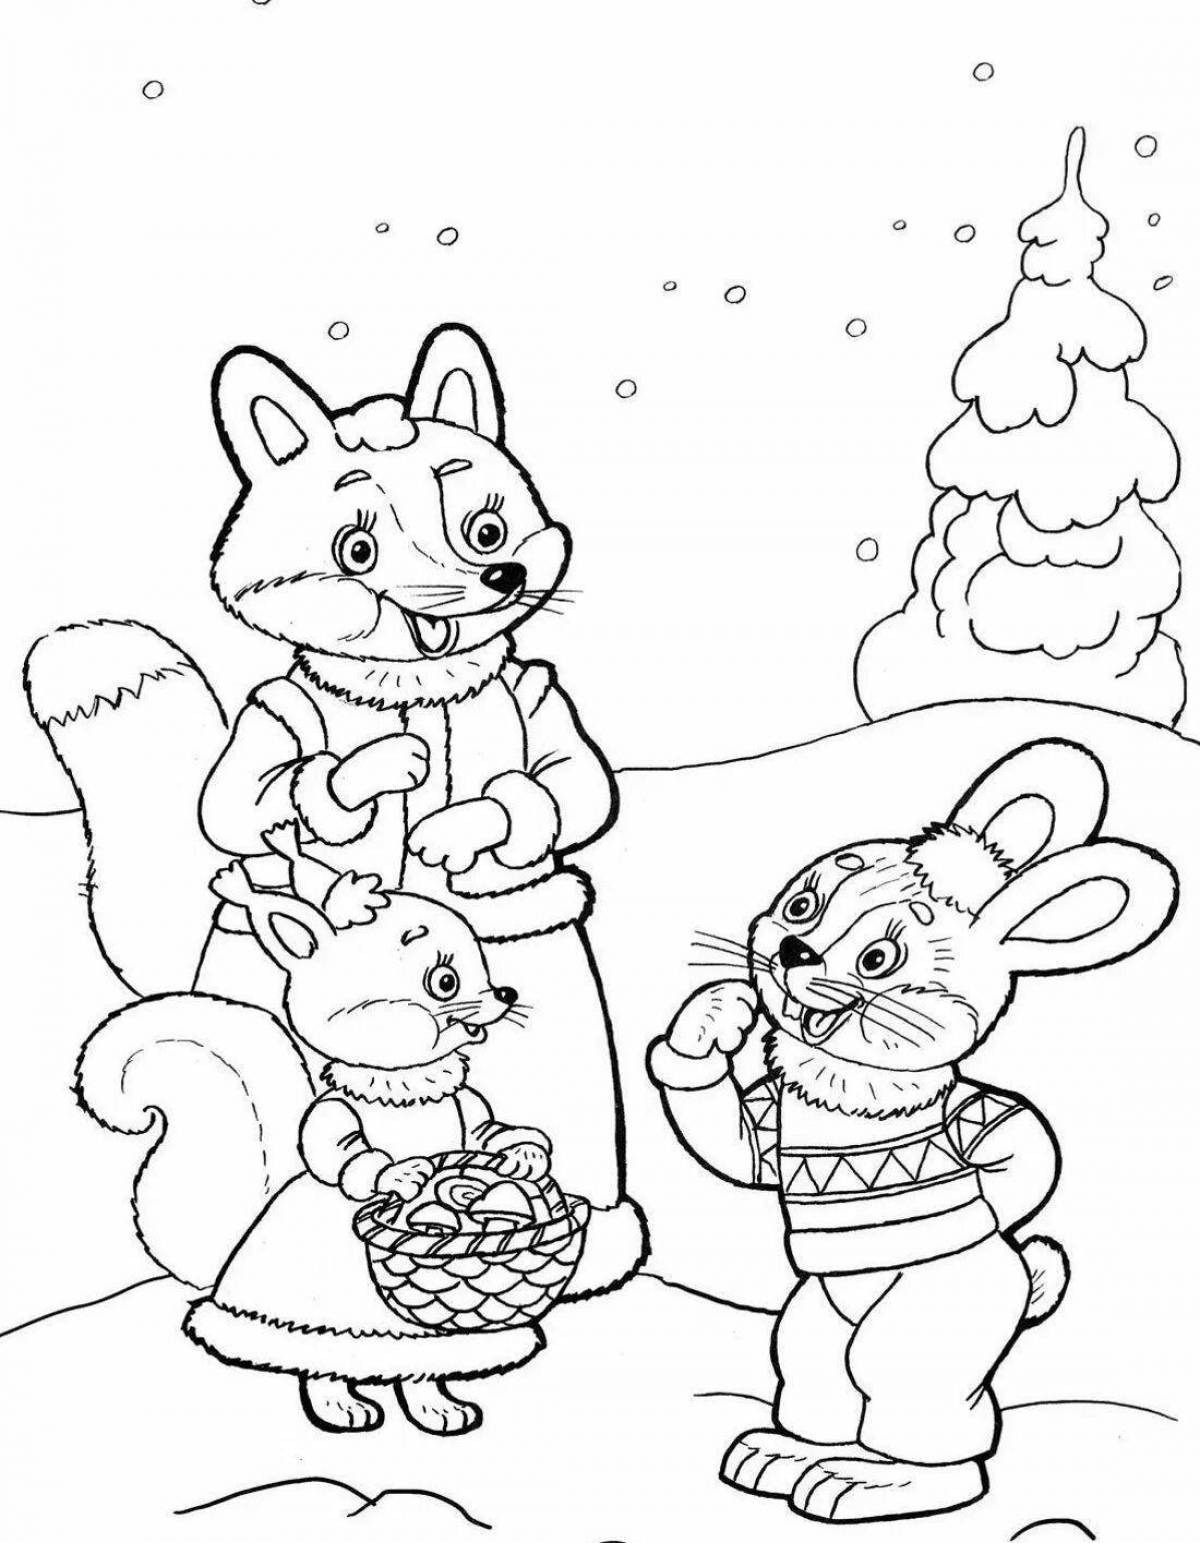 Incredible winter animal coloring book for 3-4 year olds